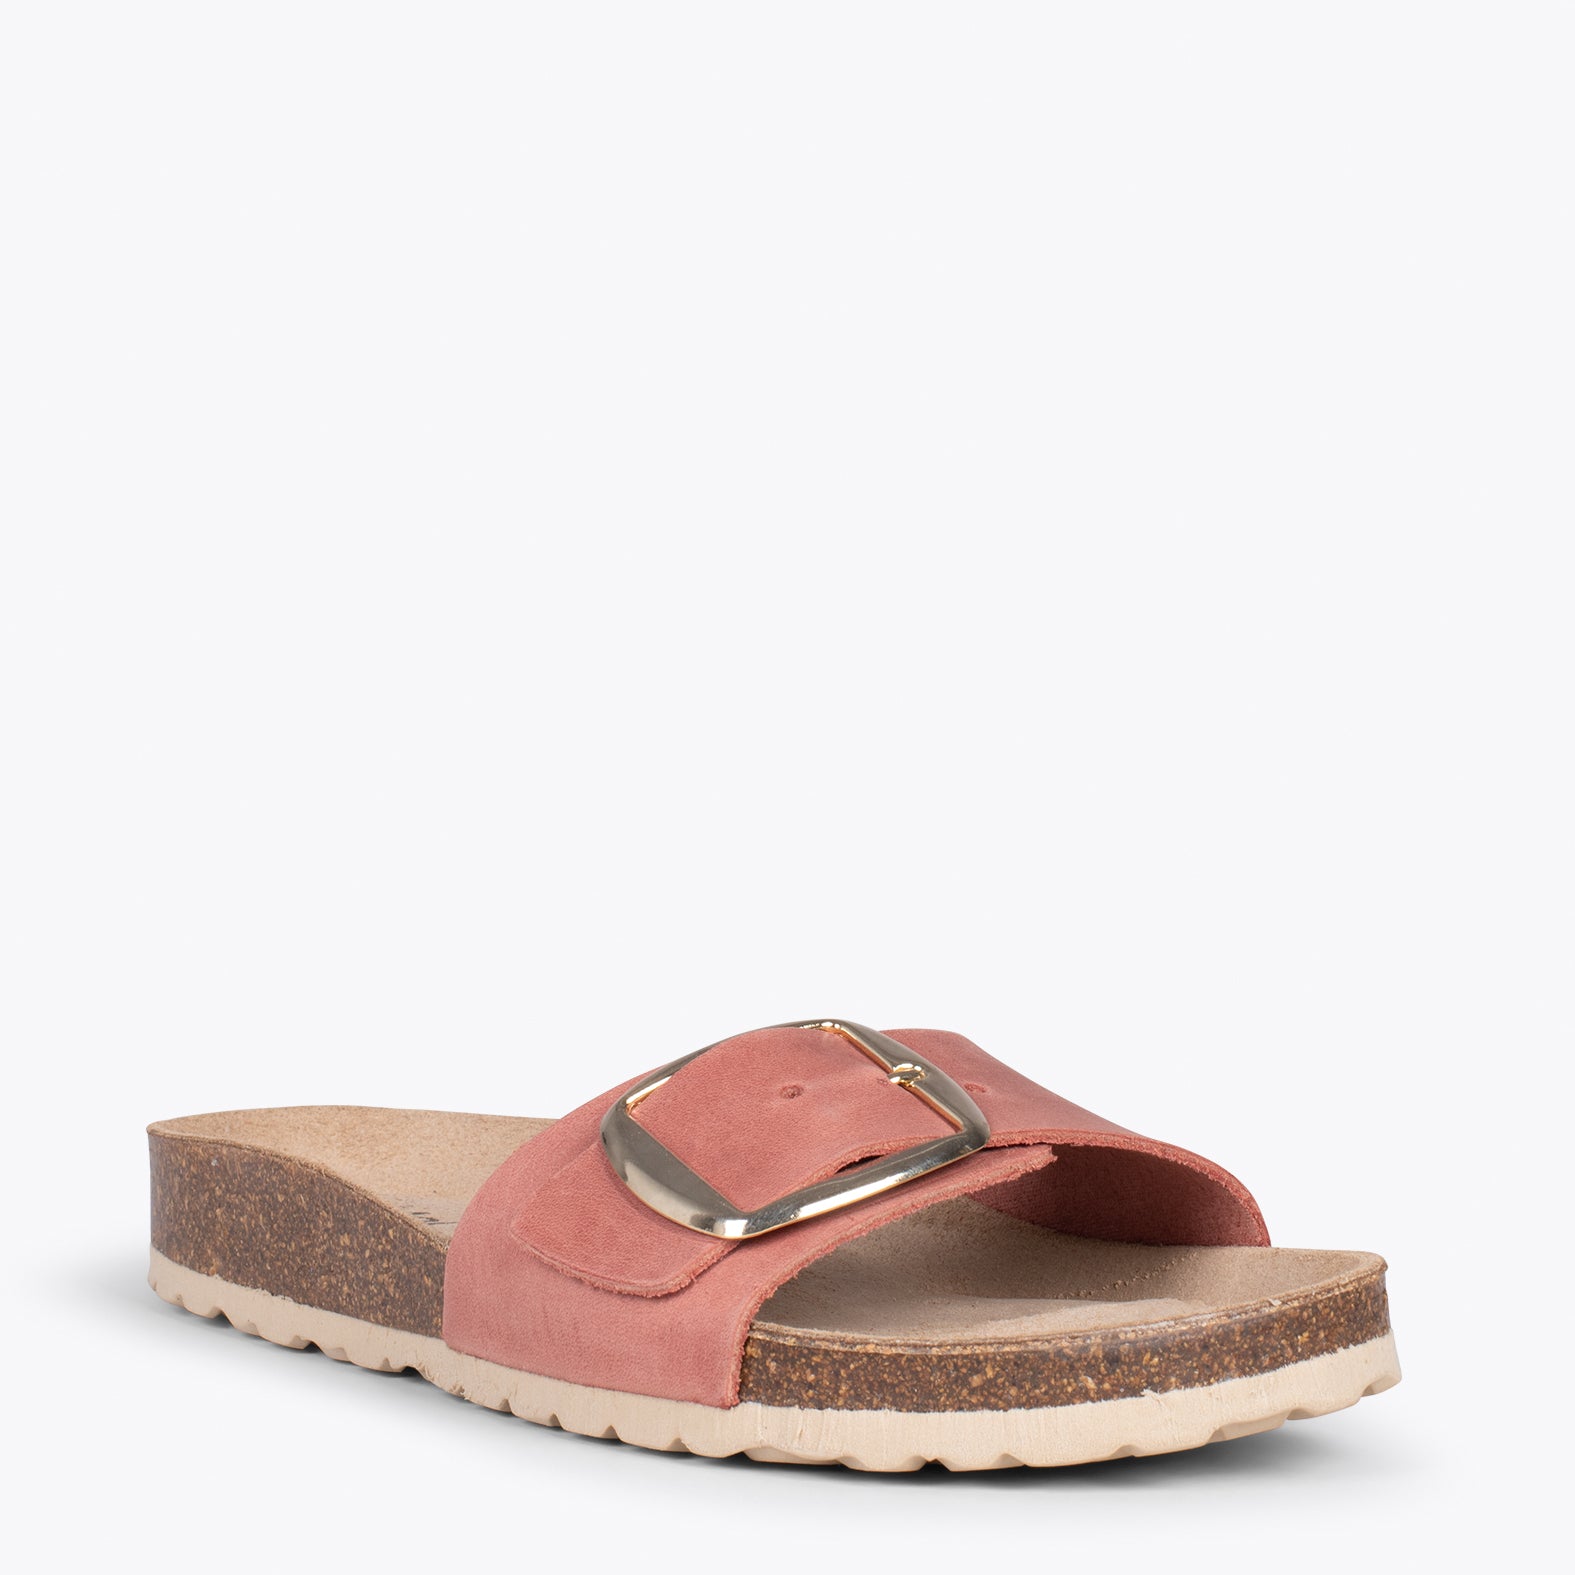 CLAVEL – CORAL leather slides with buckle